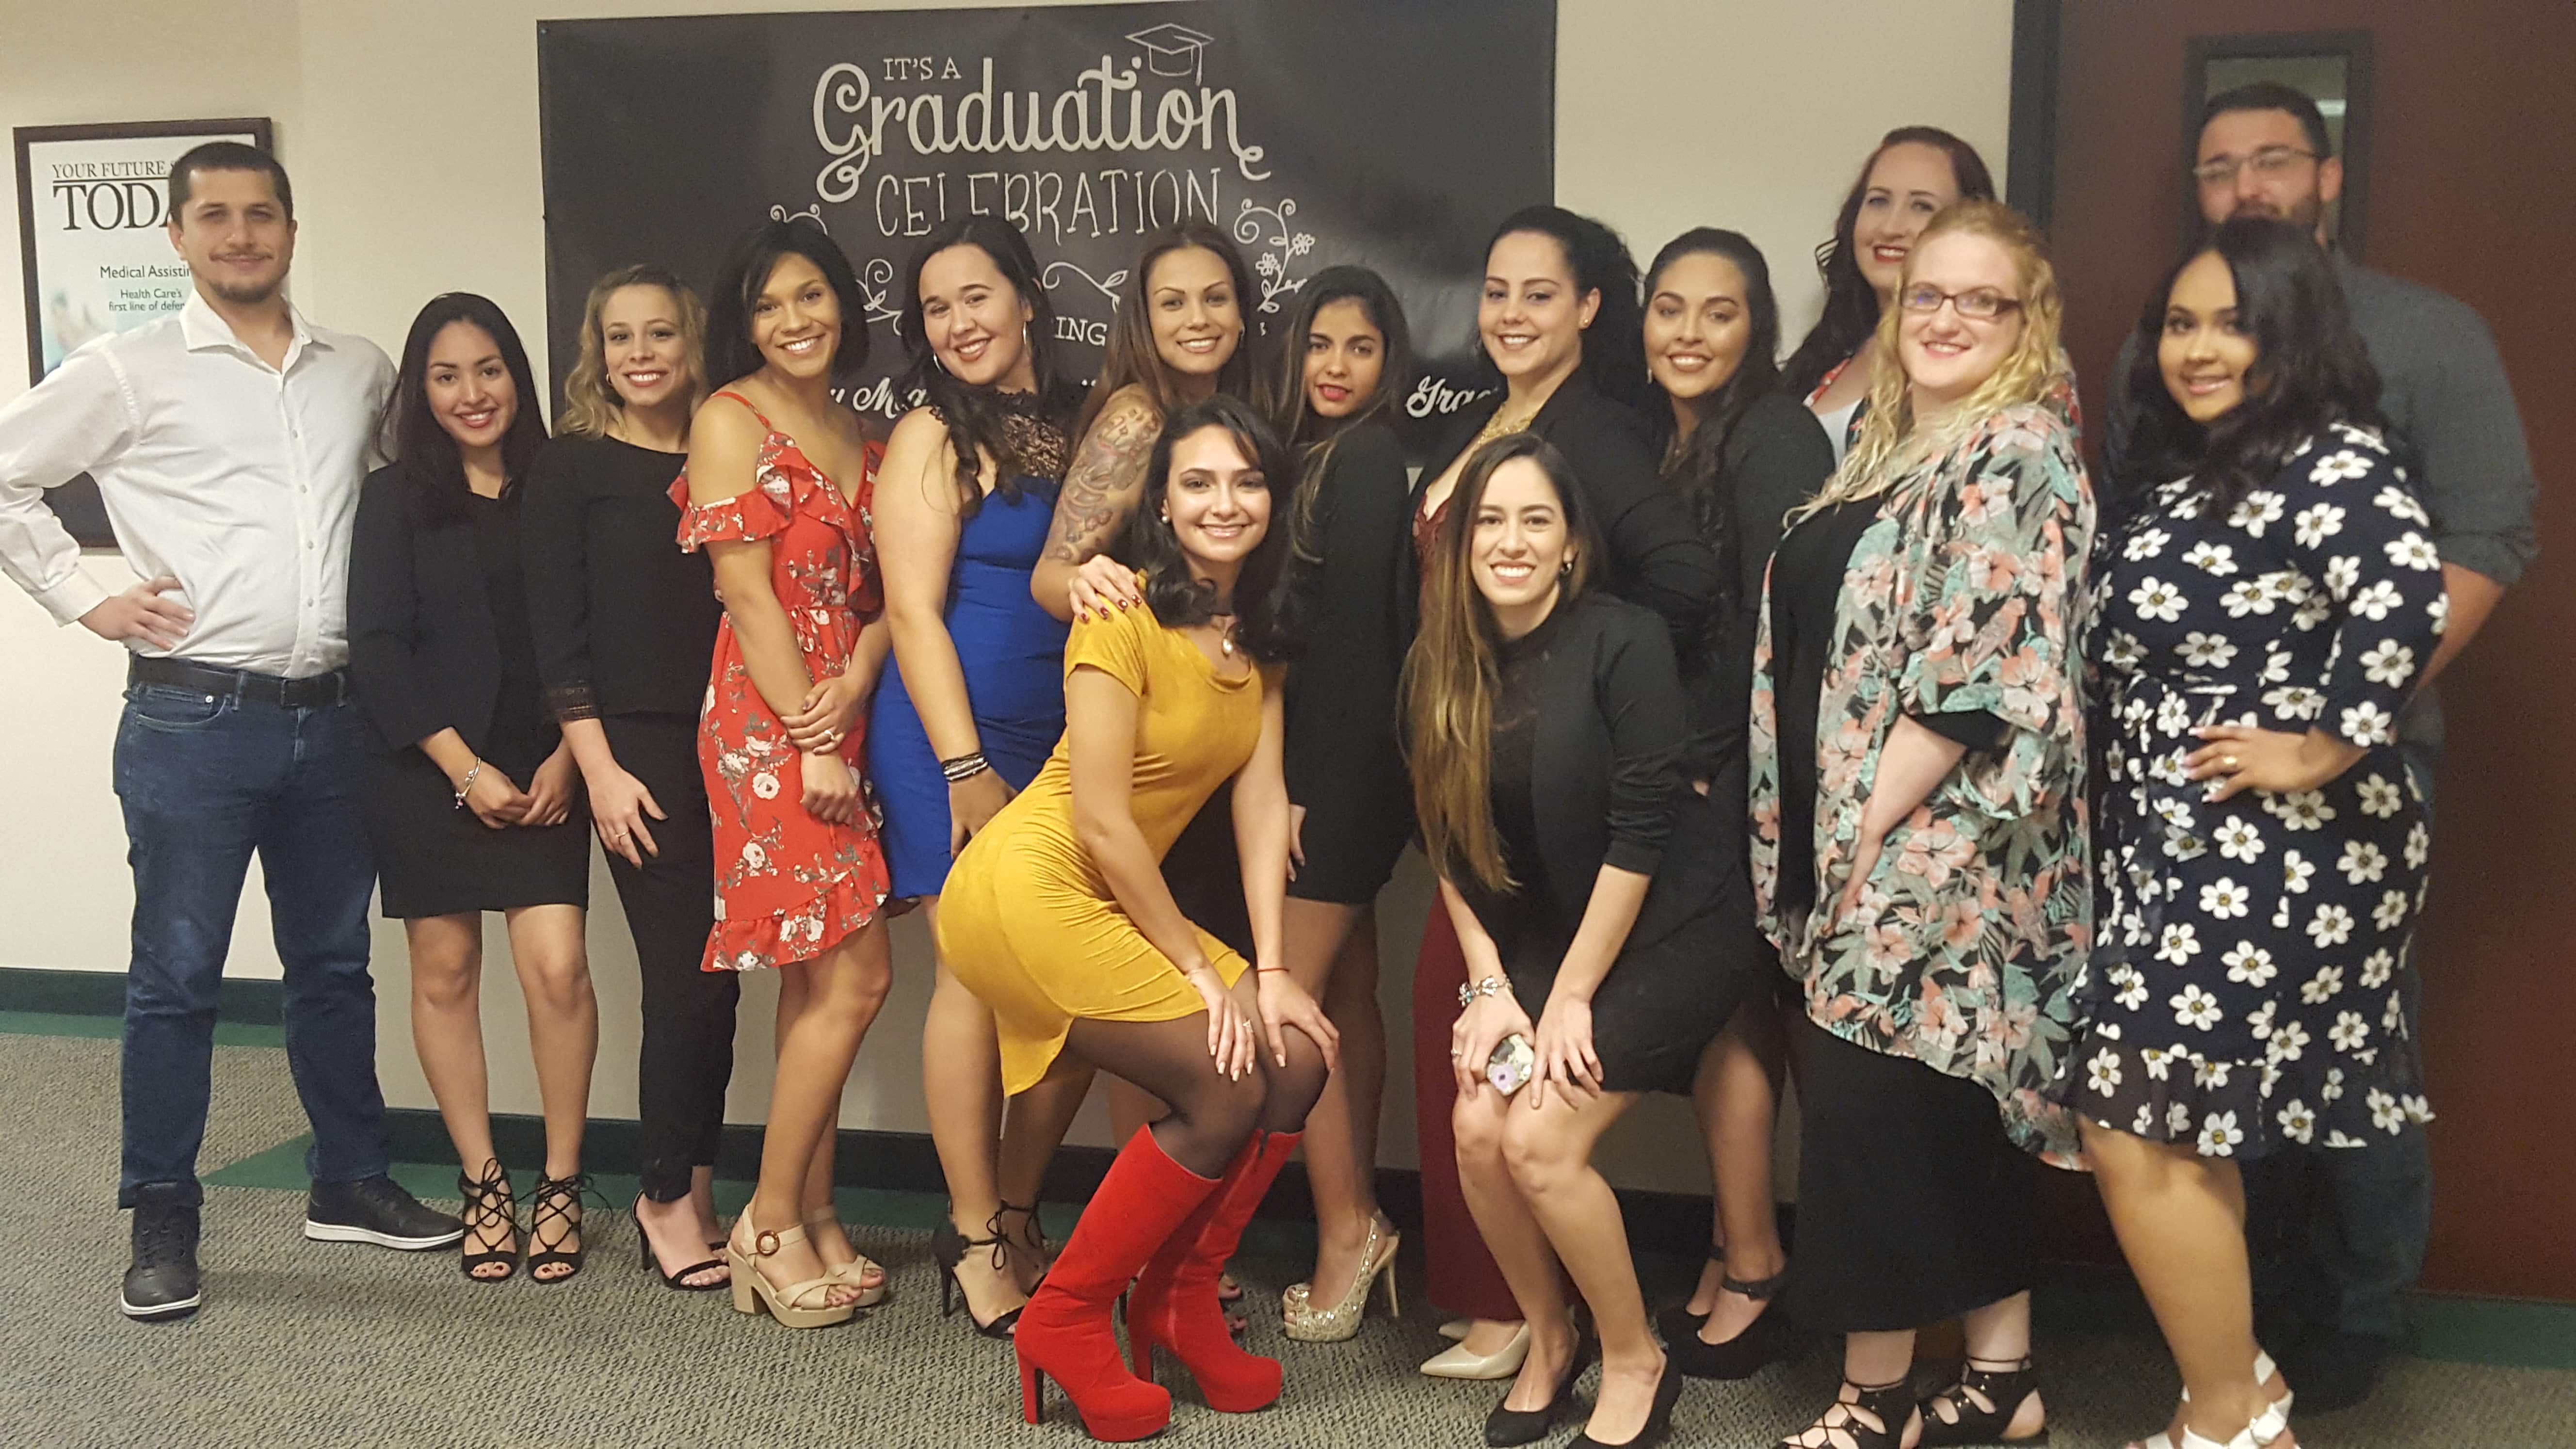 The Miami Campus Holds a Pinning Ceremony for RT Students